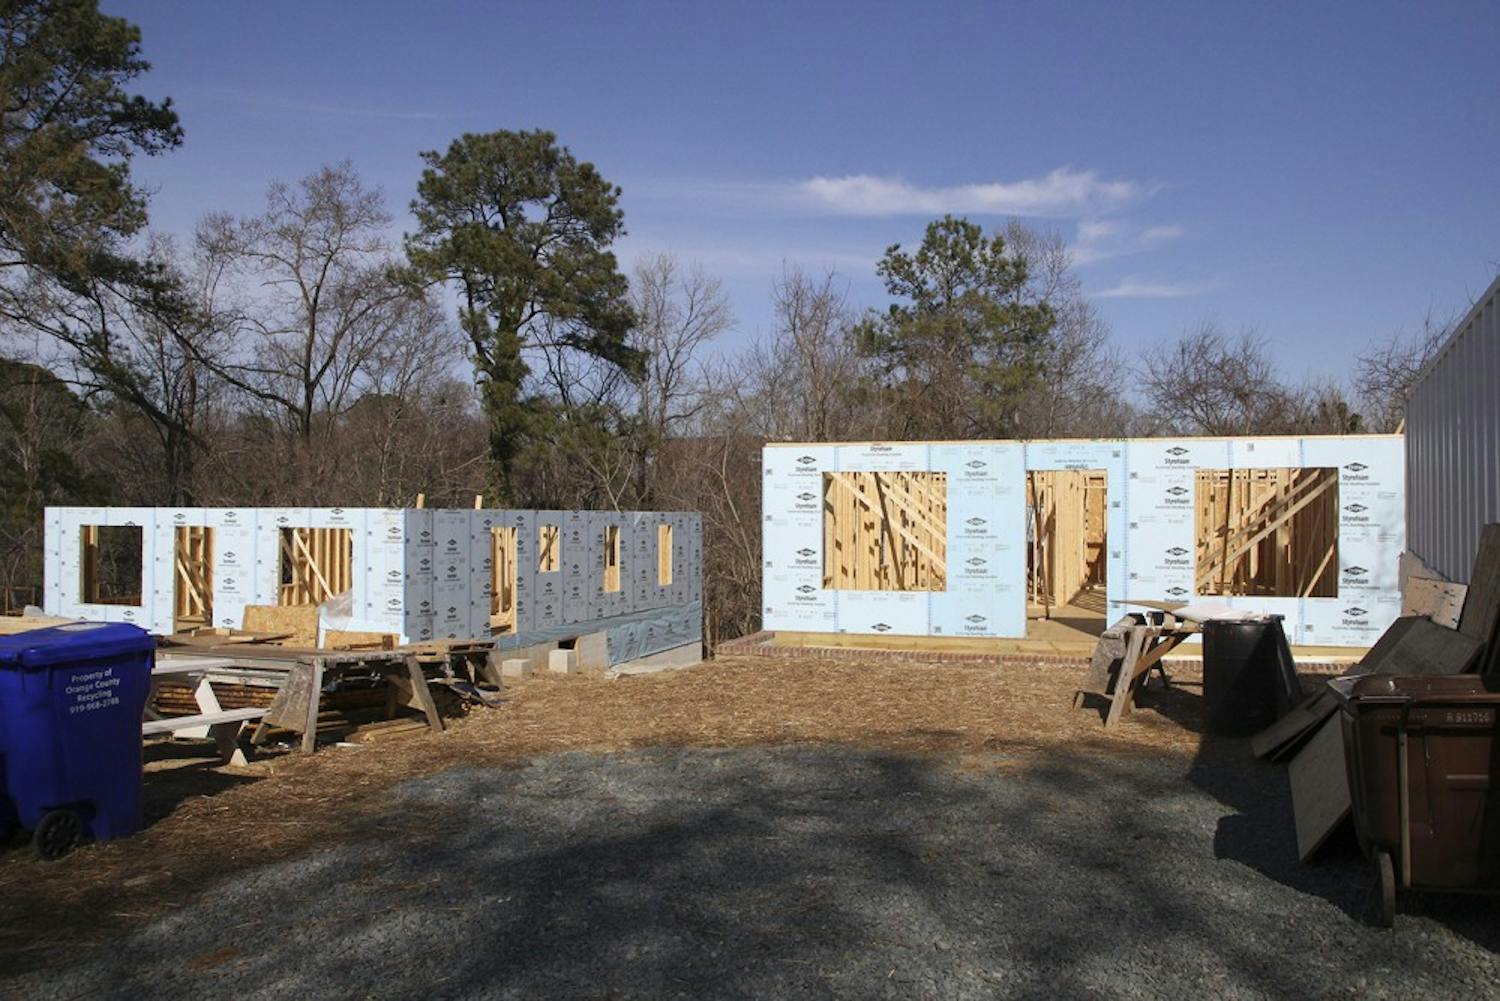 Habitat for Humanity is in the process of building two houses located on Sykes Street in Chapel Hill.